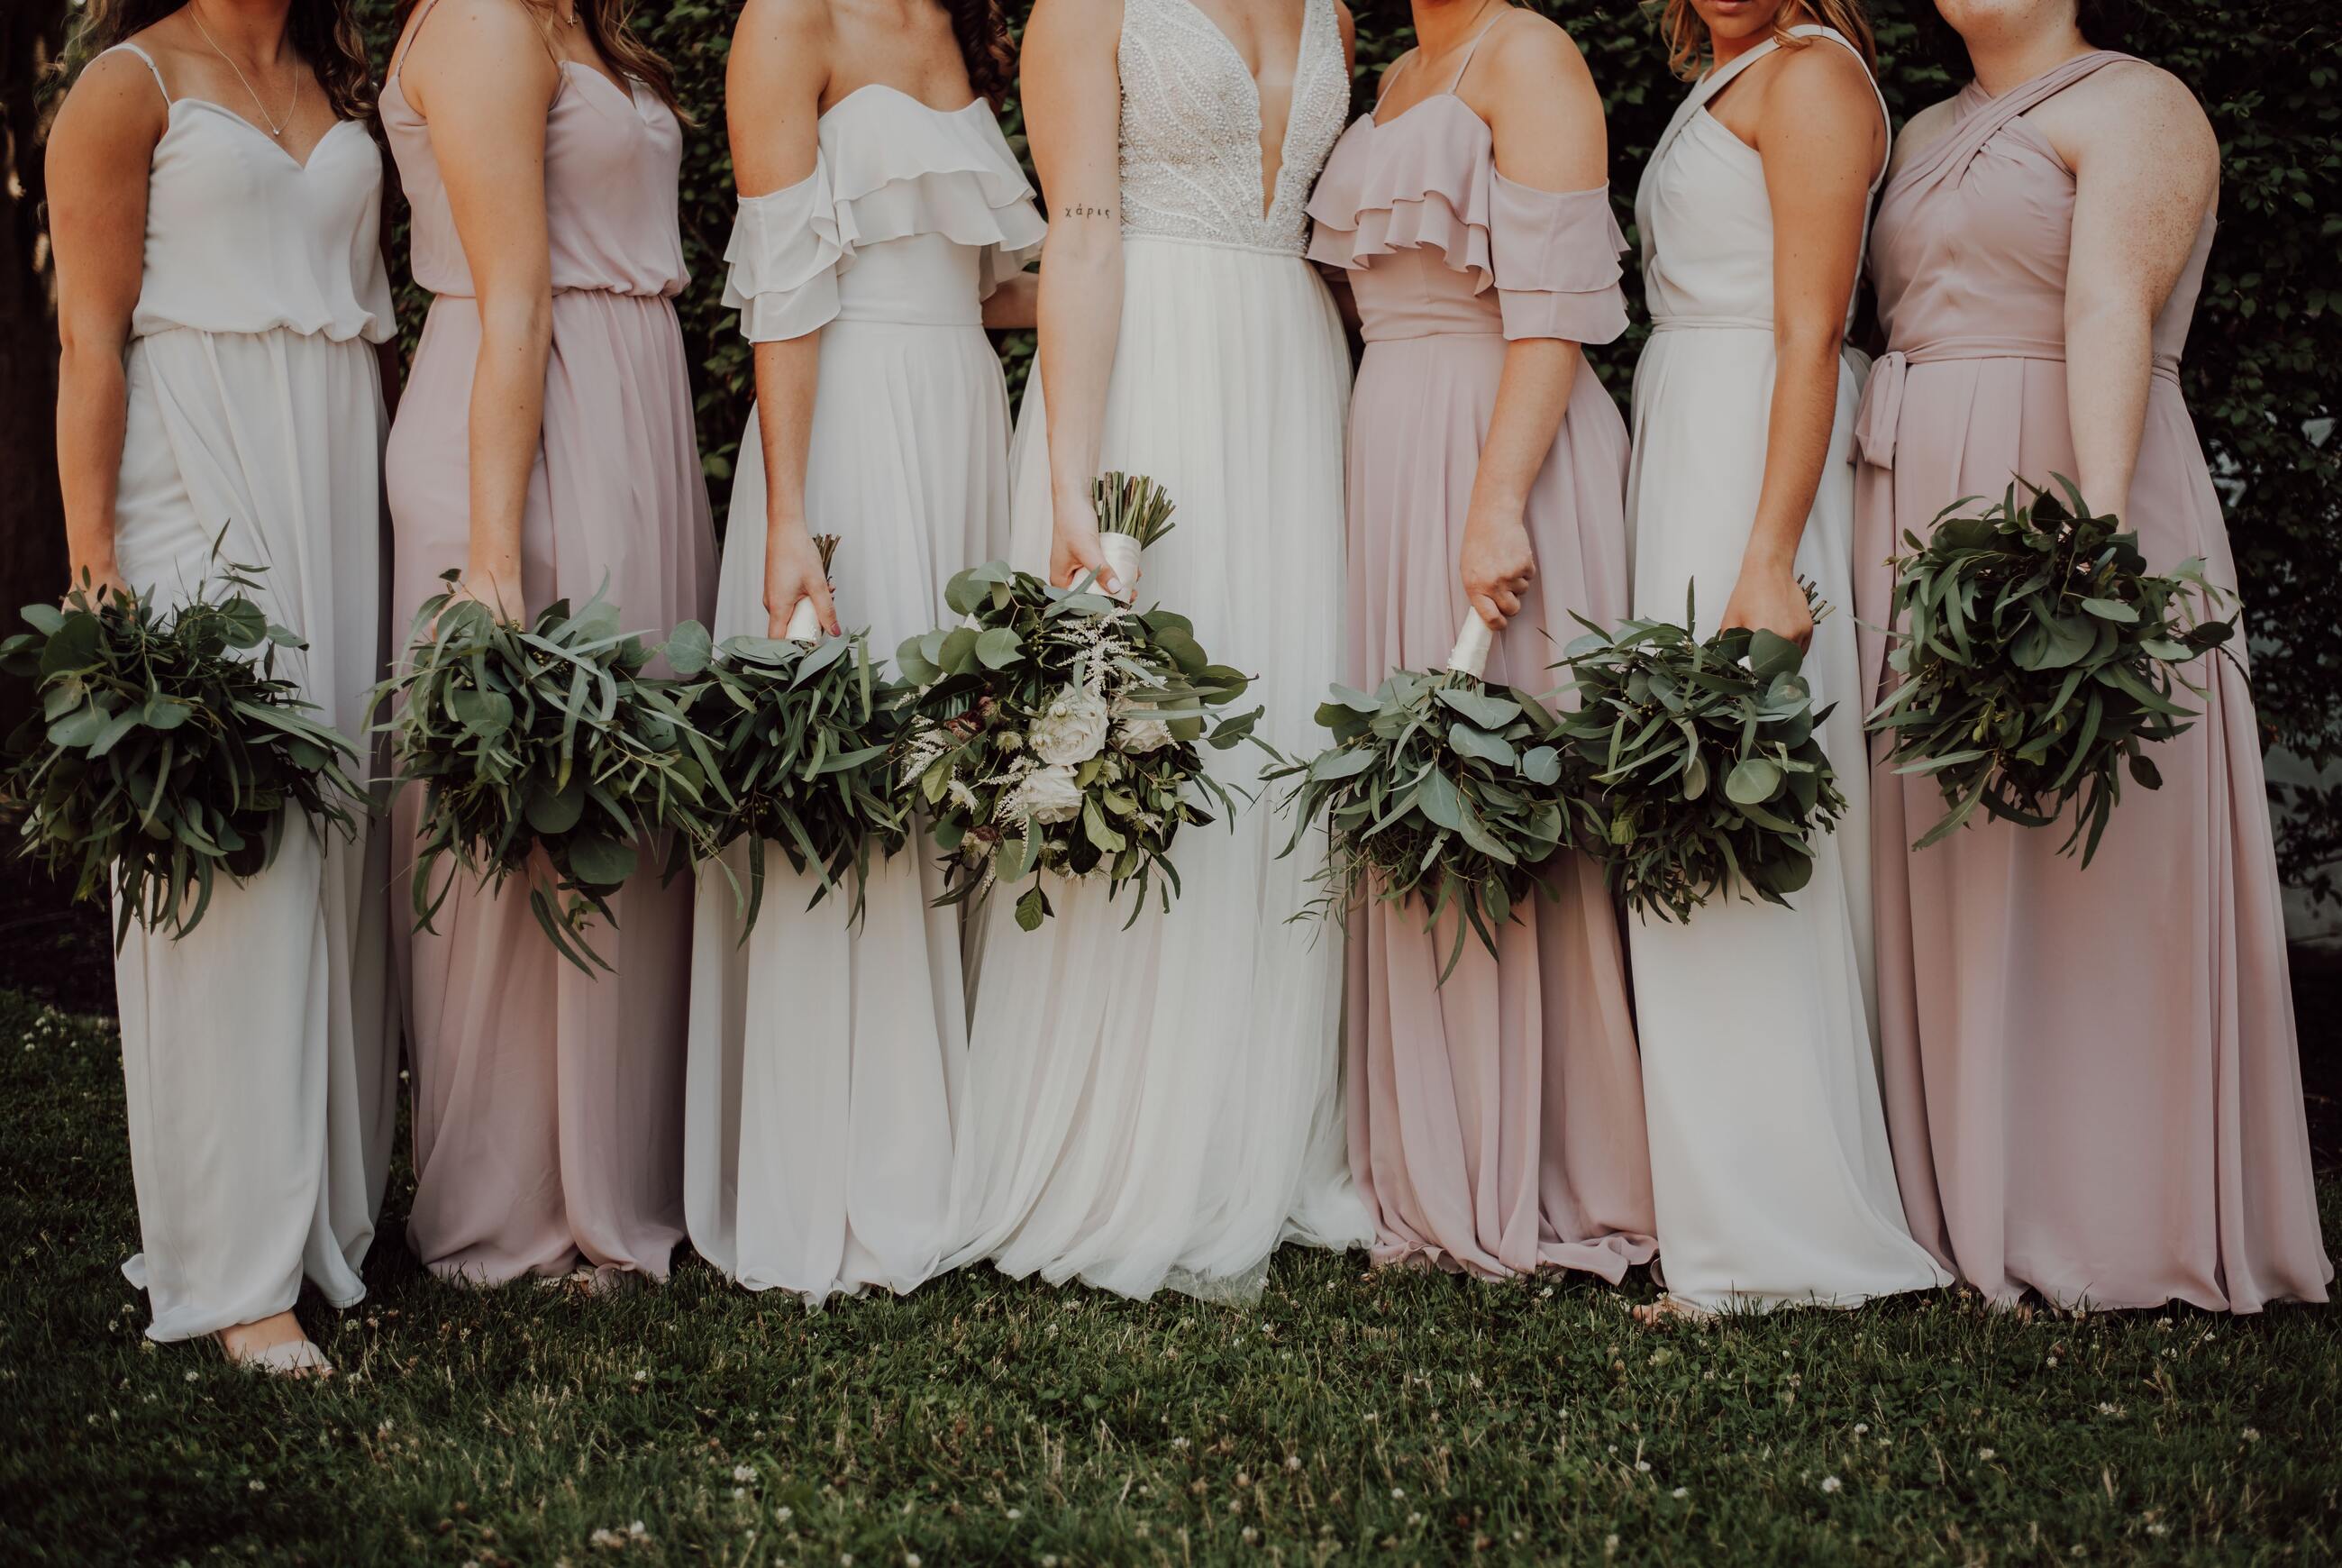 Our Favorite Tips for Choosing the Right Bridesmaid Dresses Image